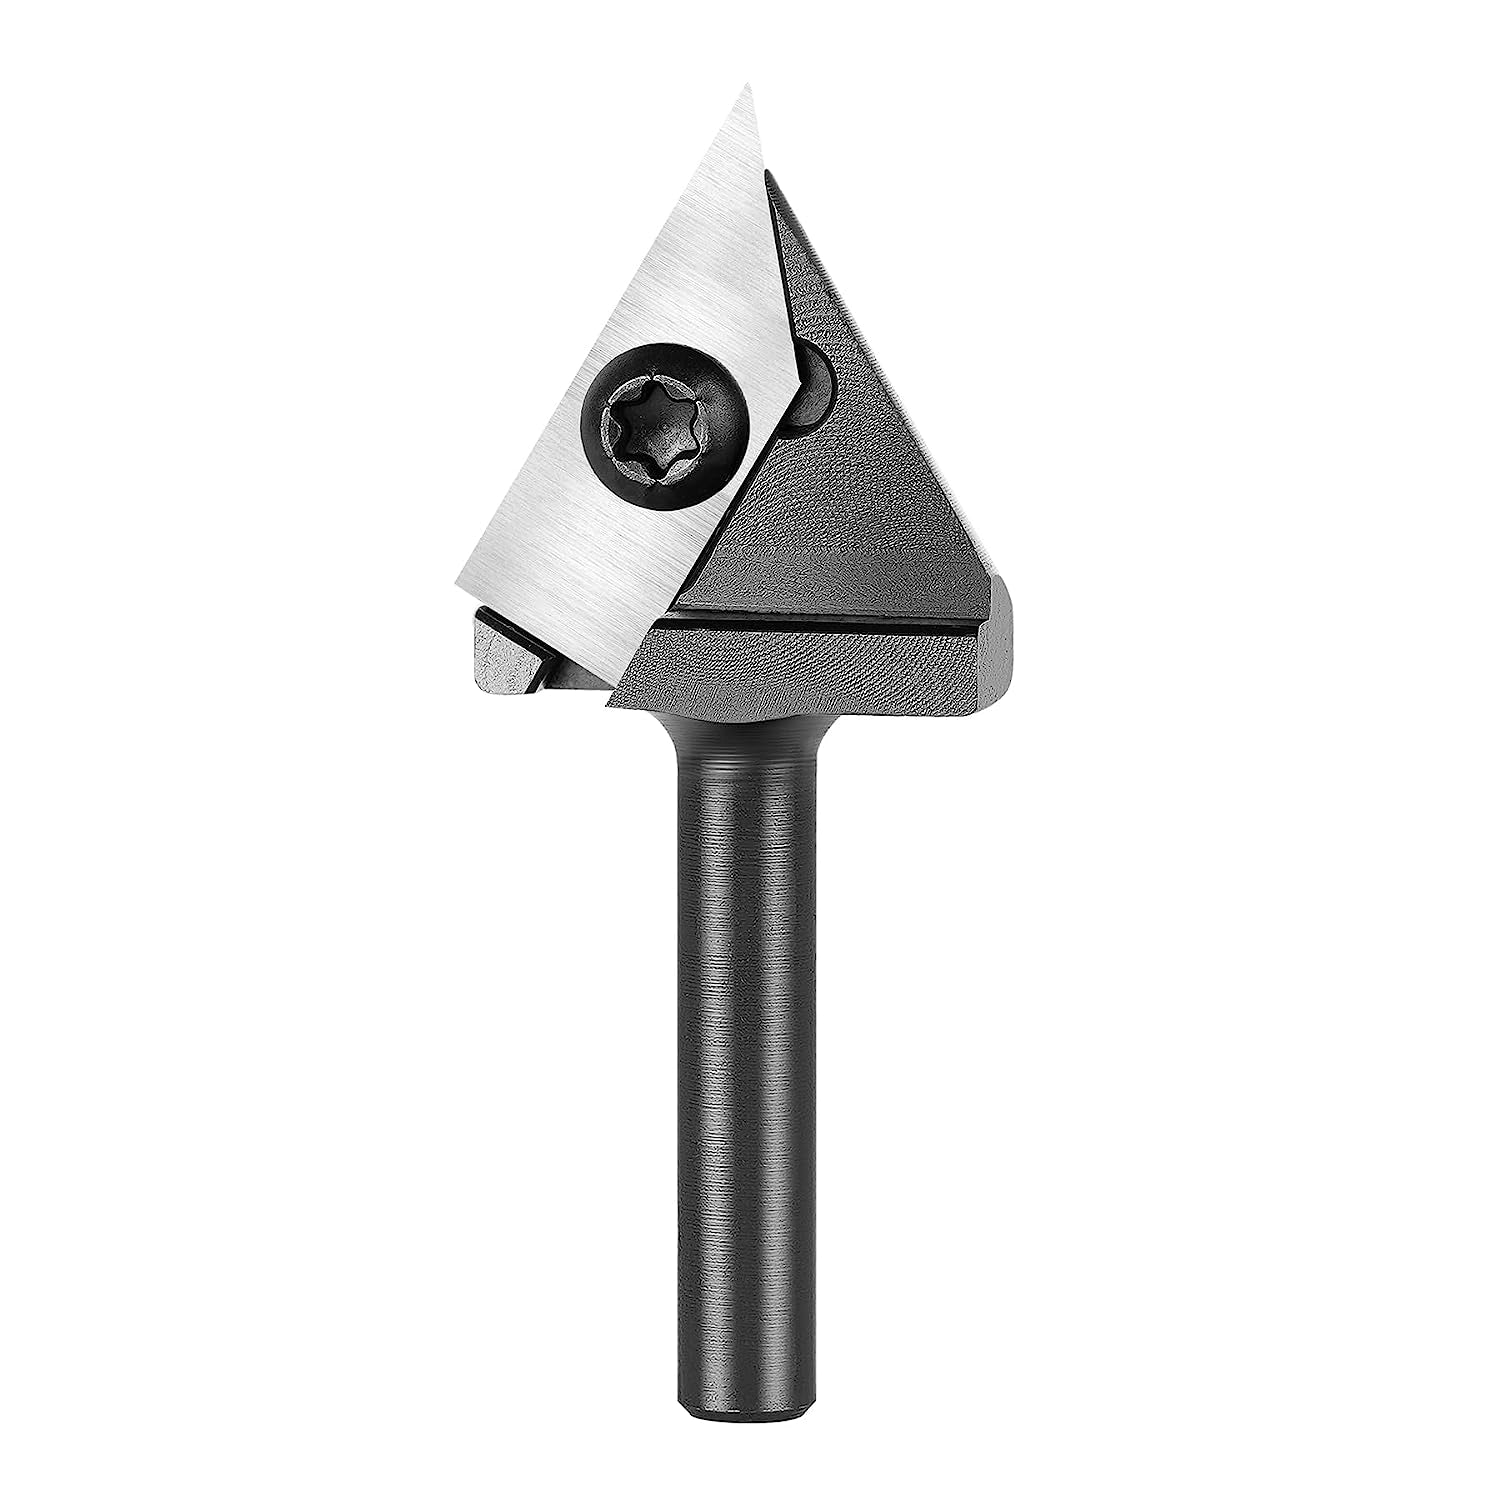 SpeTool 60 Degree V Groove Router Bit With Carbide Insert 1/4 Shank